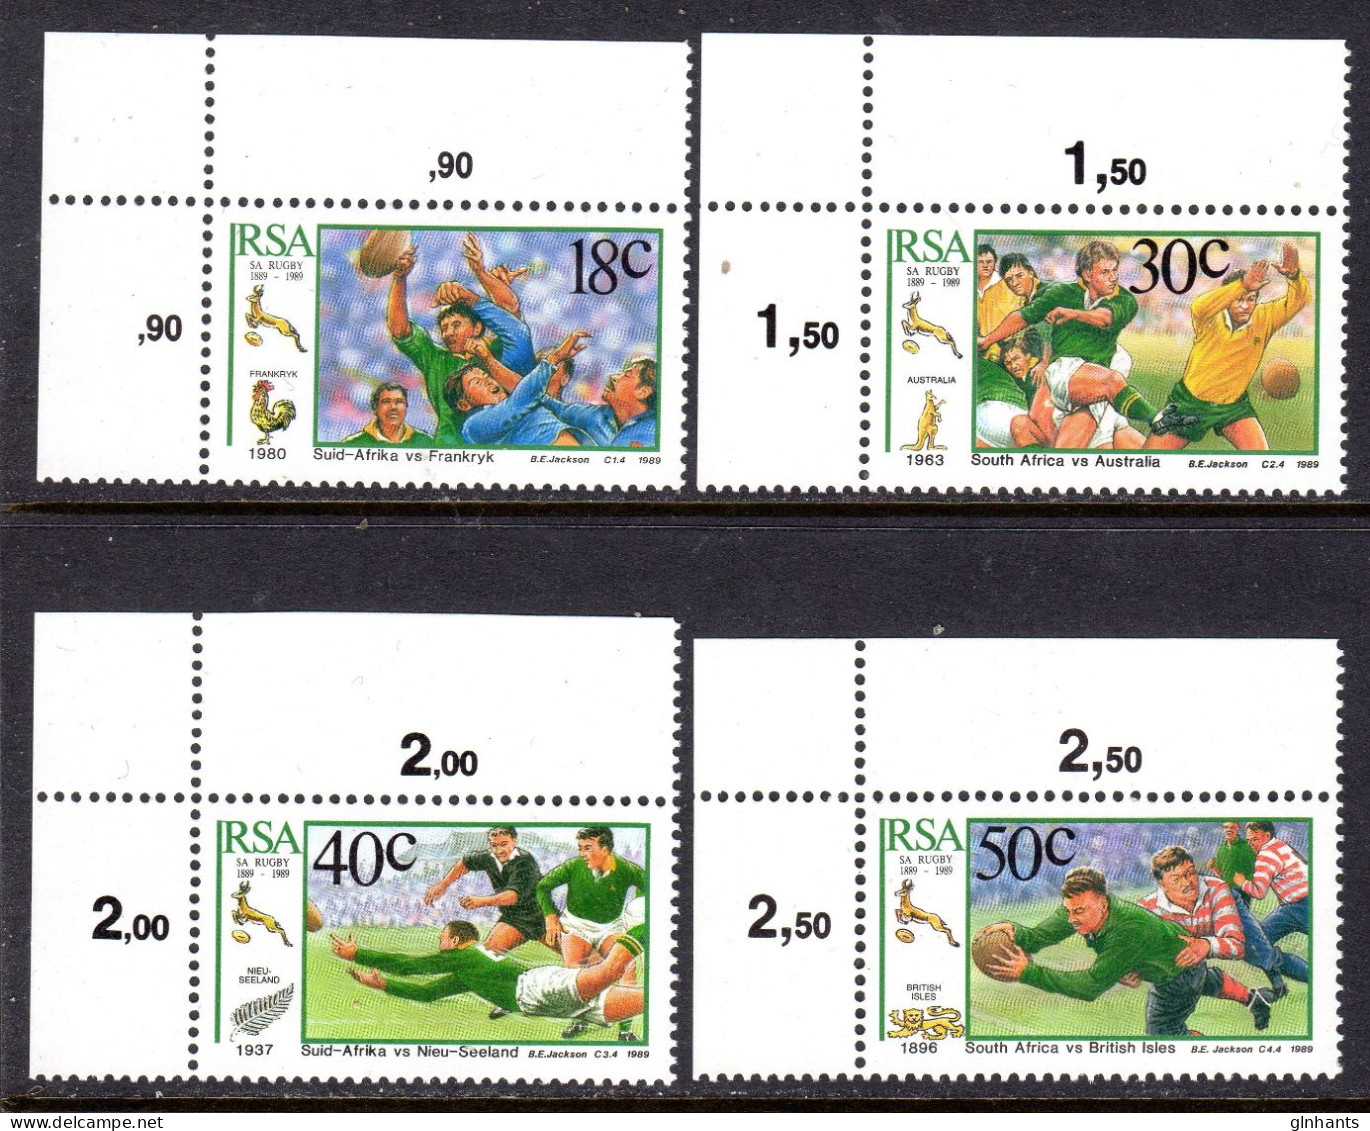 SOUTH AFRICA - 1989 RUGBY ANNIVERSARY SET (4V) FINE MNH ** SG 685-688 - Neufs